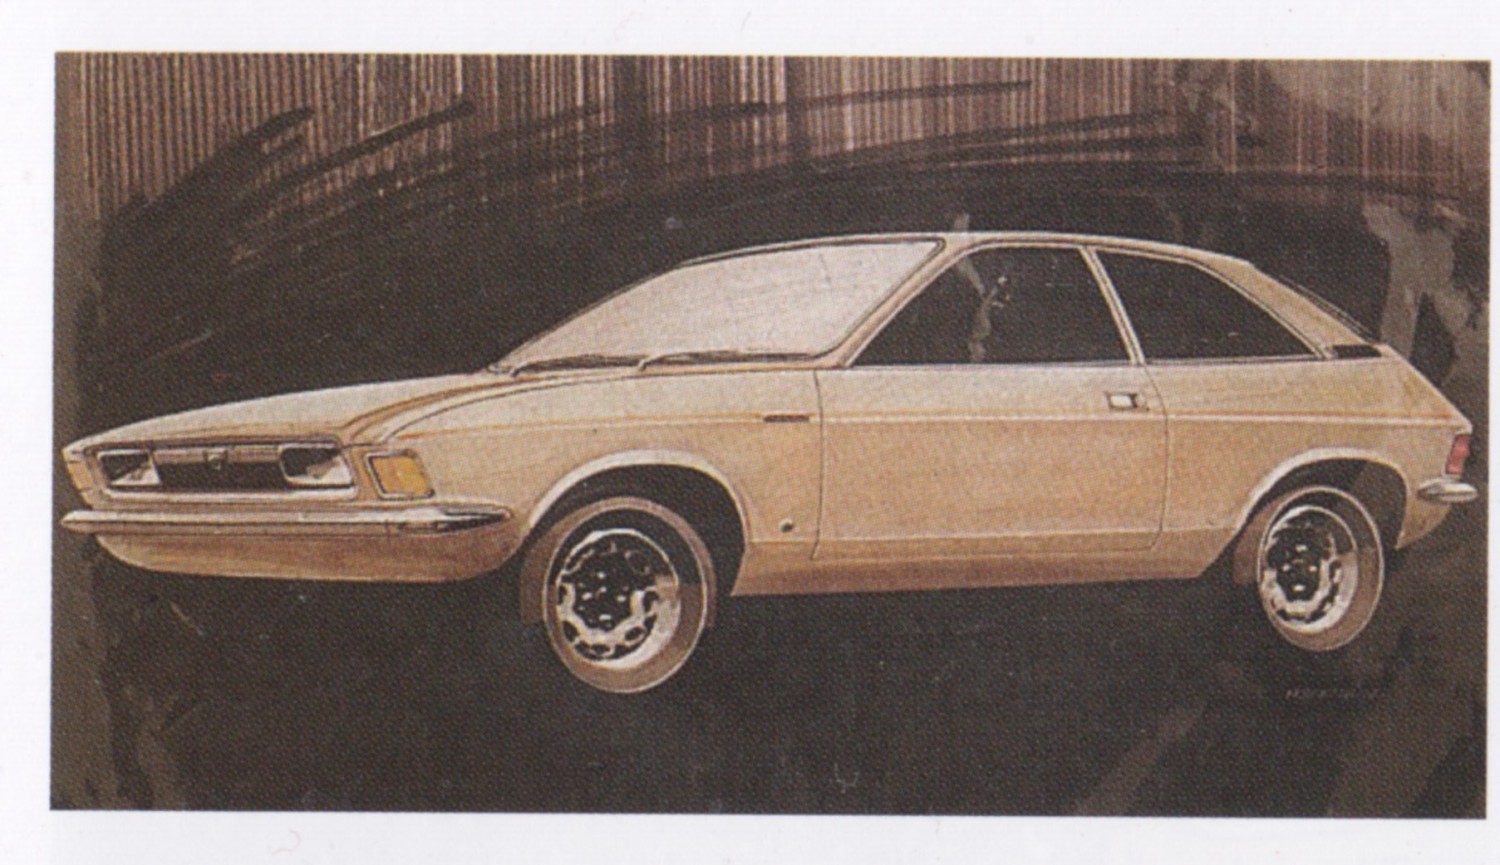 The New Driving Force from Austin – British Leyland's Disastrous